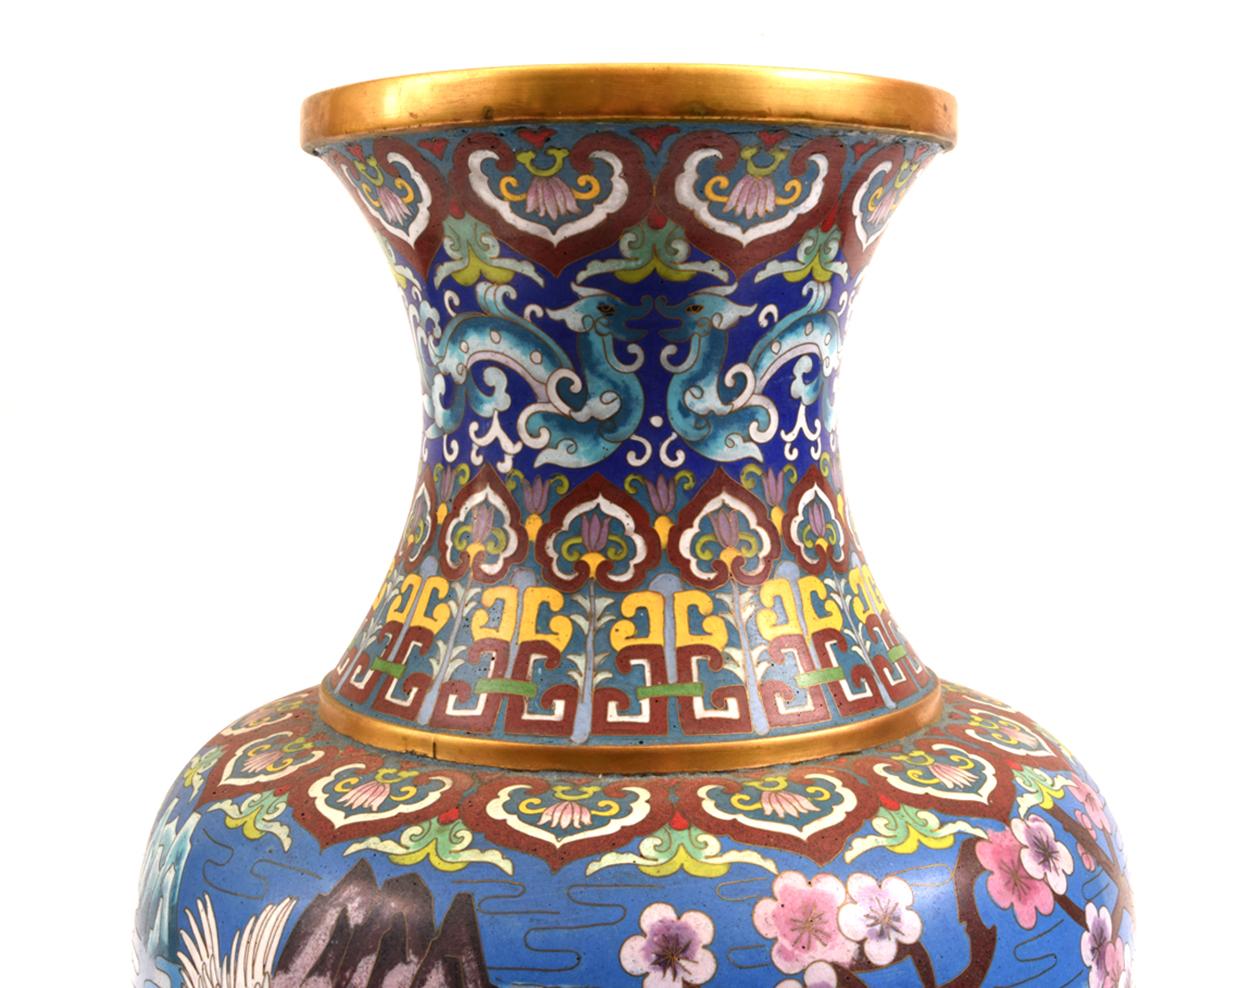 European Very Large Decorative Cloisonné with Blossom Flowers Vase or Piece